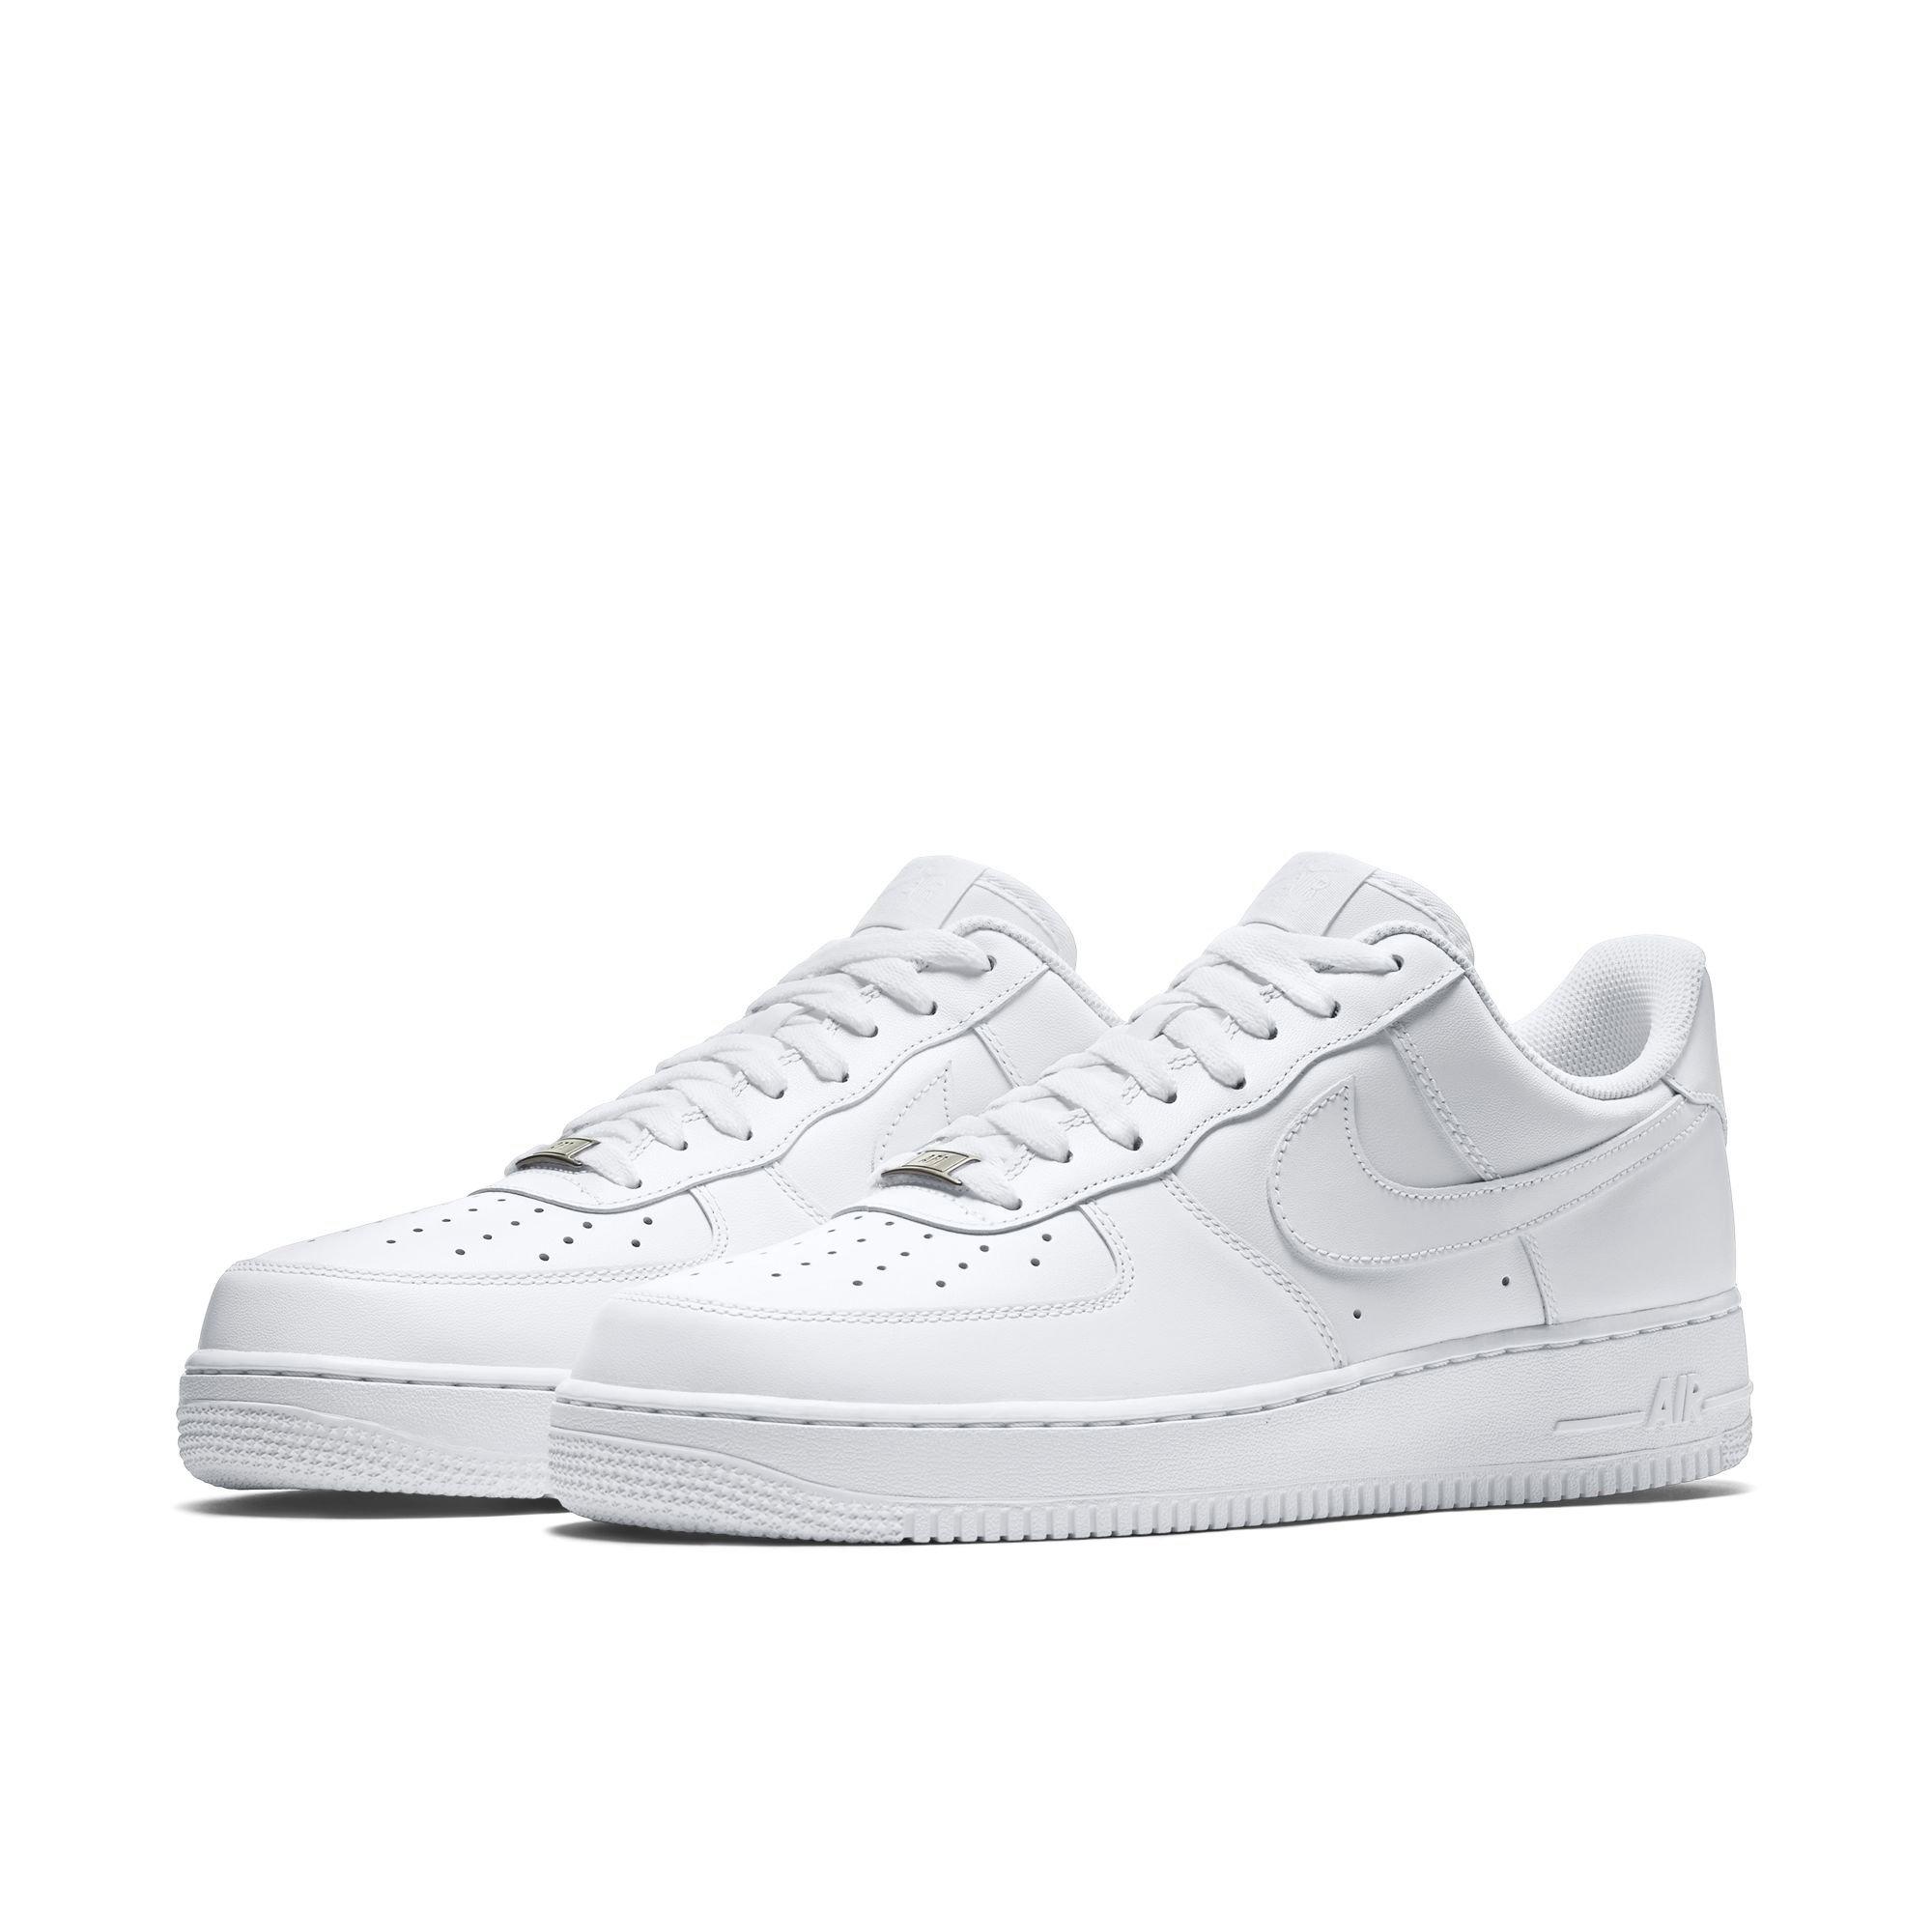 nike air force 1 low men's white basketball shoes